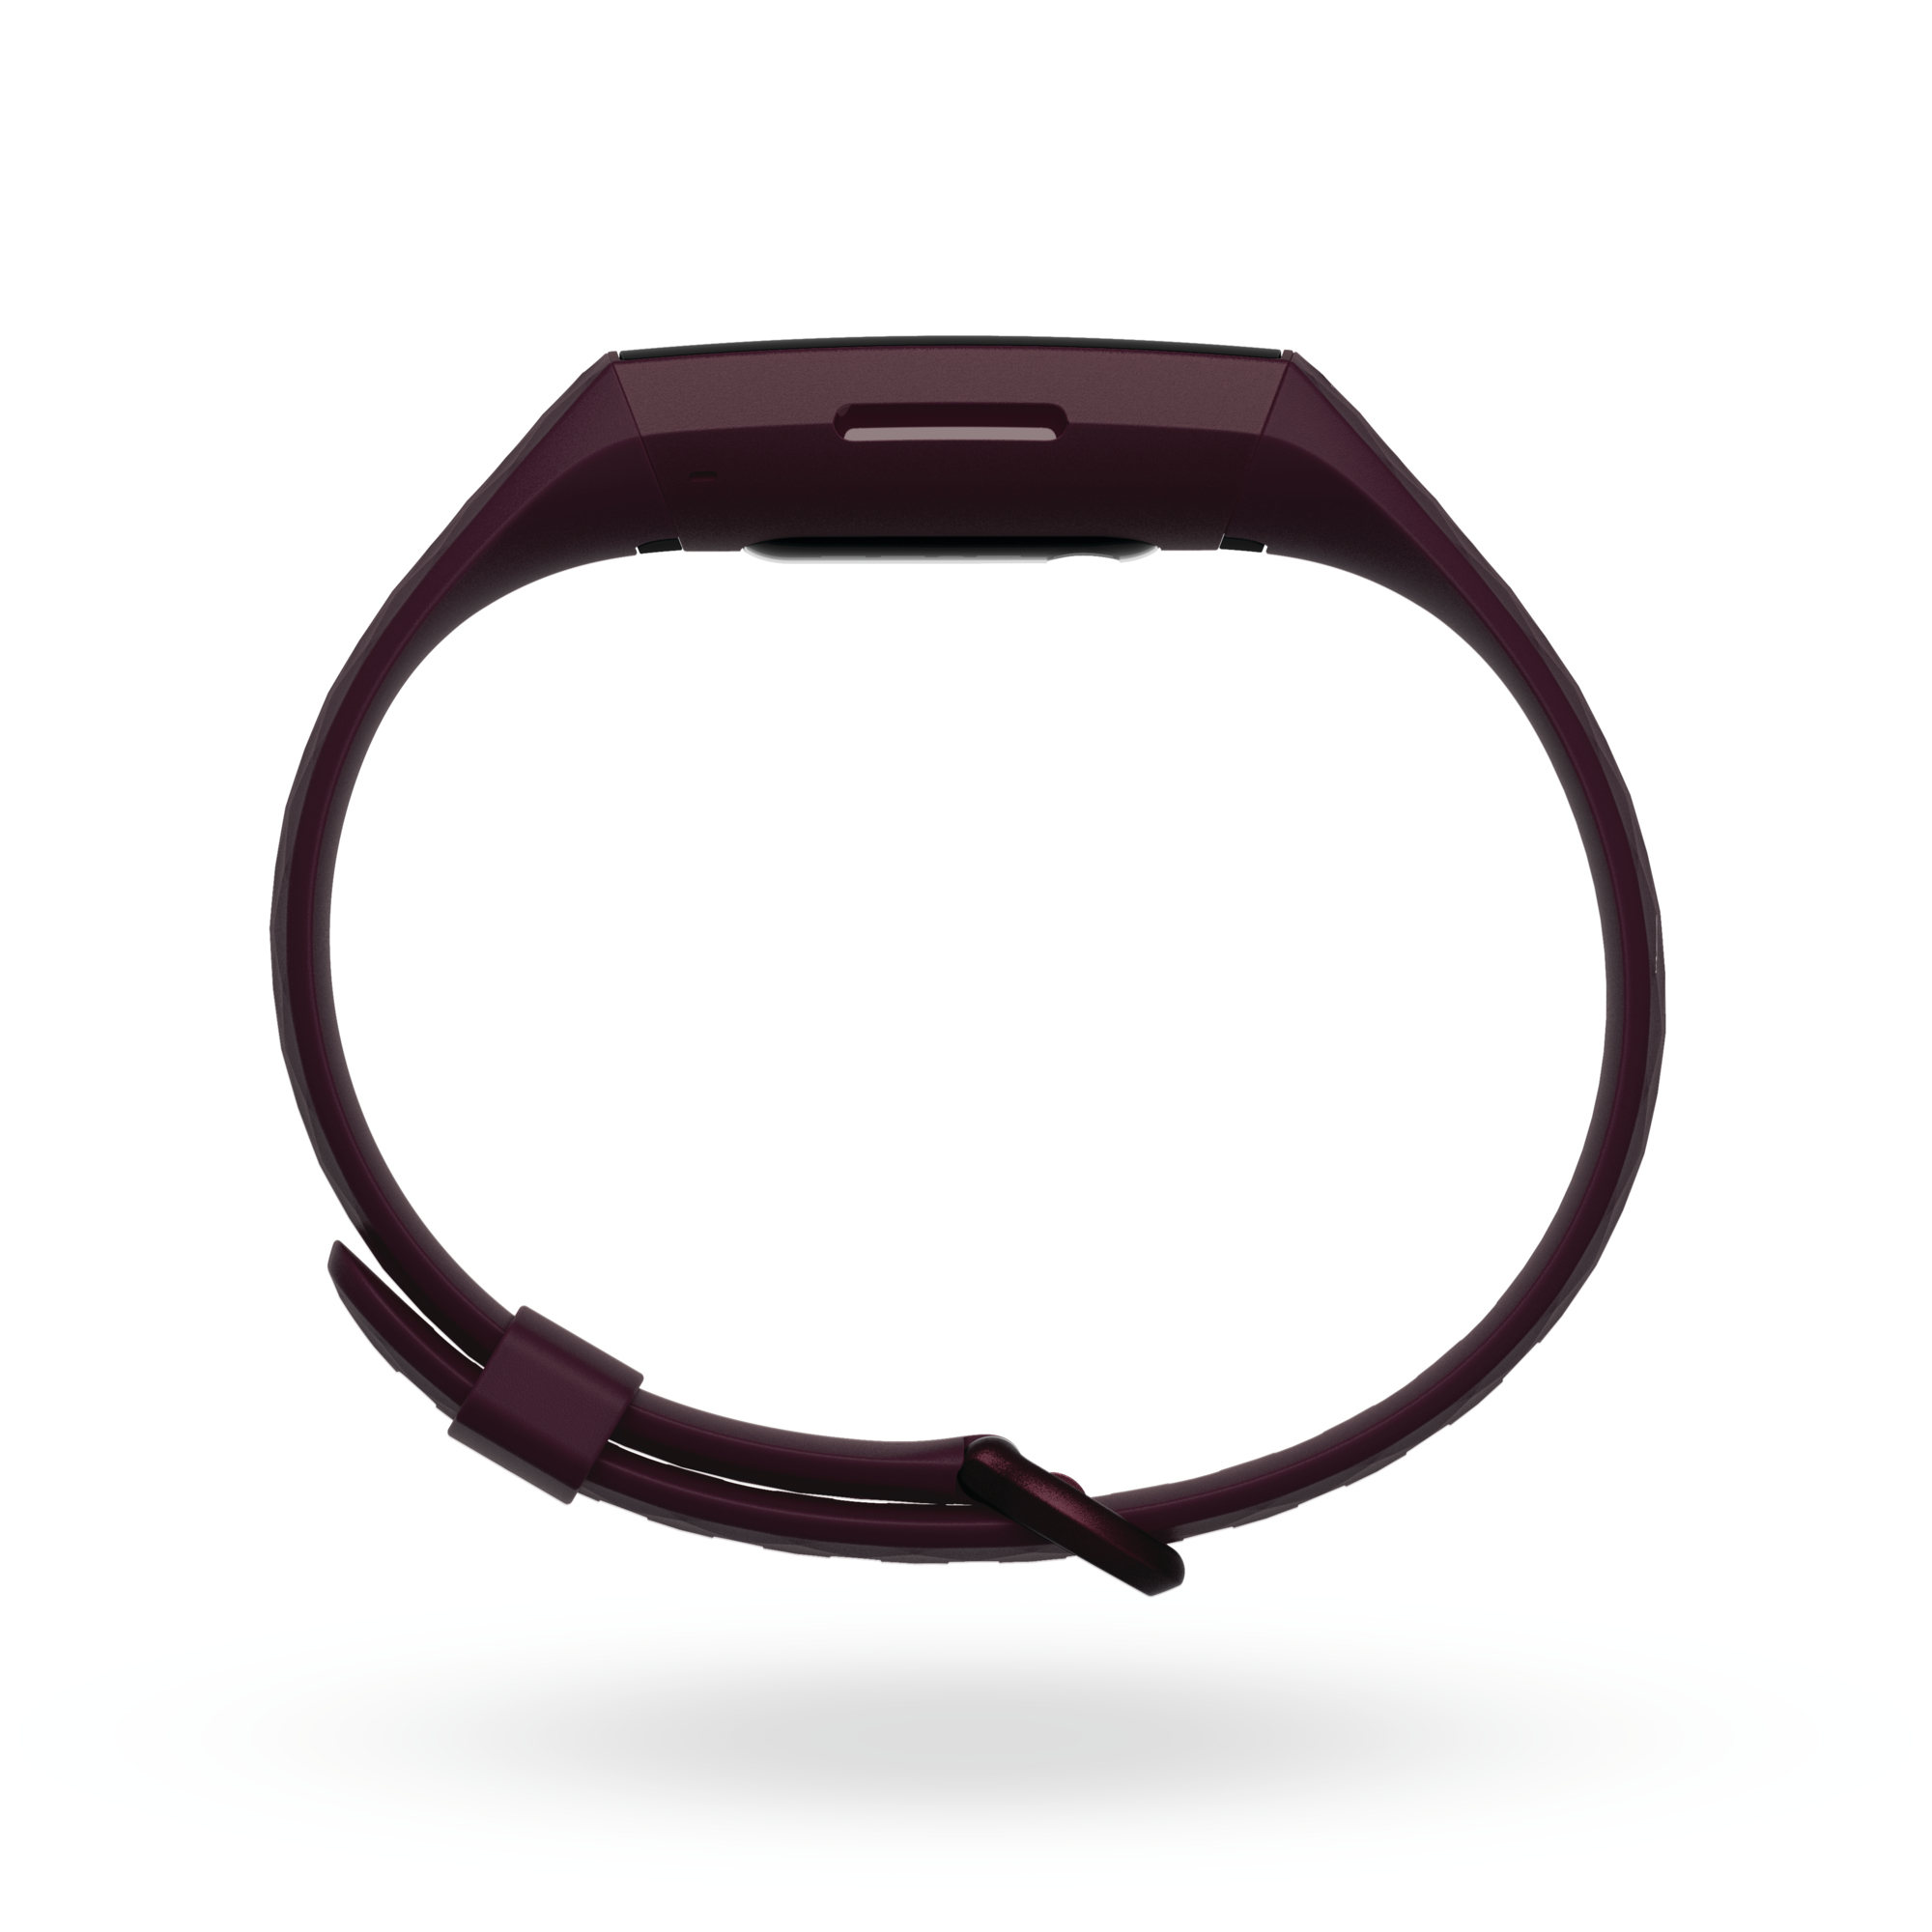 Fitbit Charge HR 4 (NFC), Rosewood